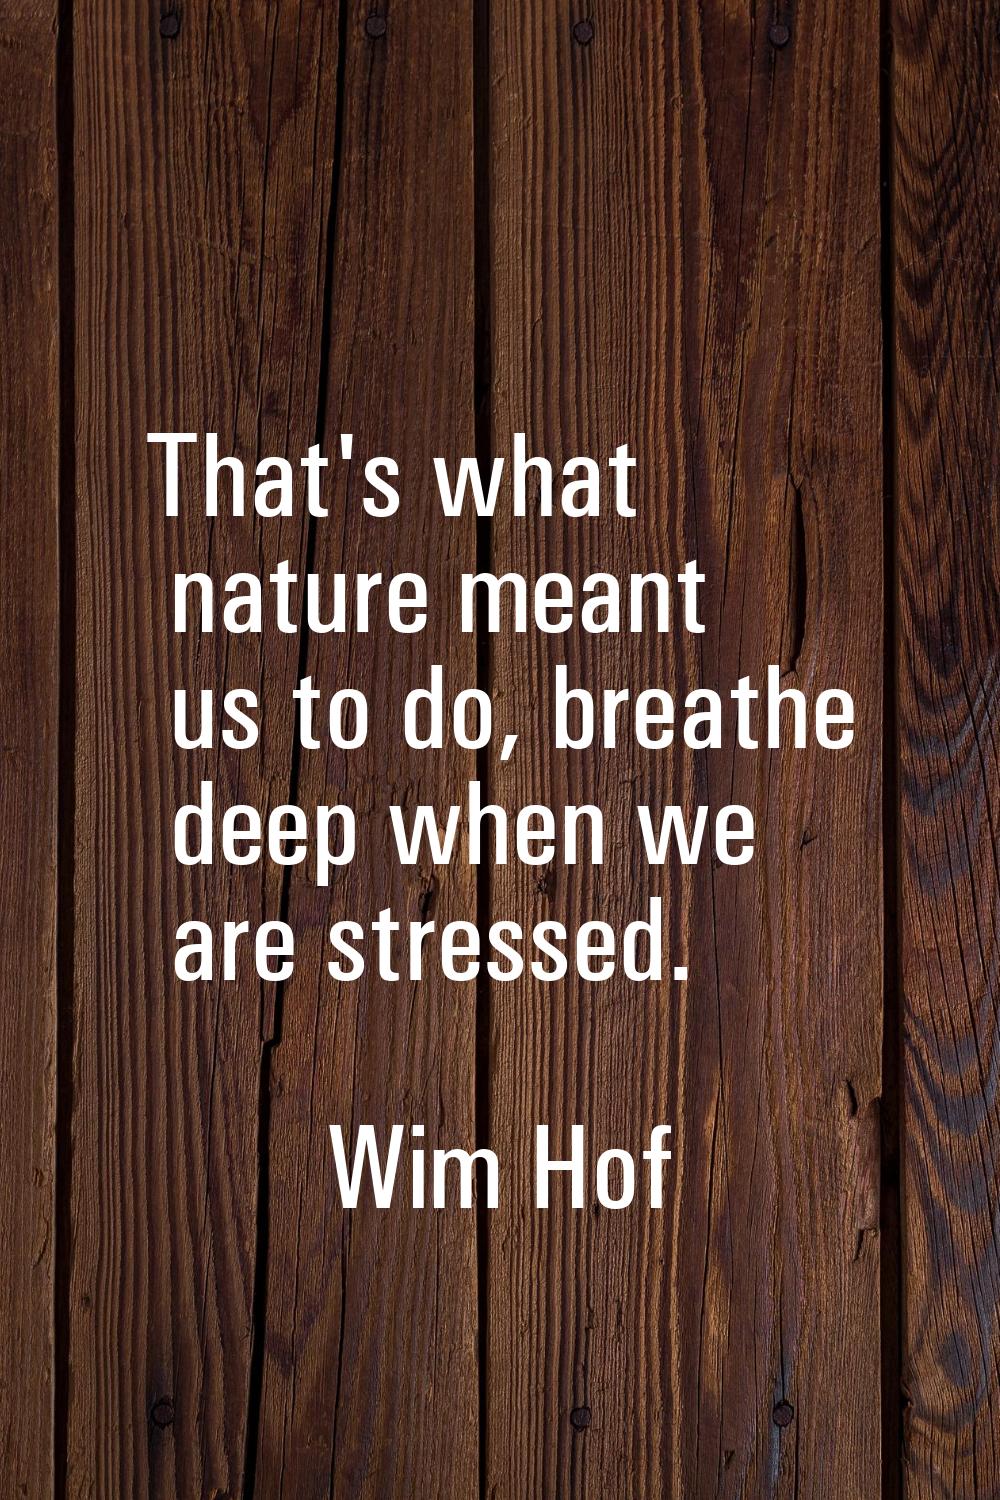 That's what nature meant us to do, breathe deep when we are stressed.